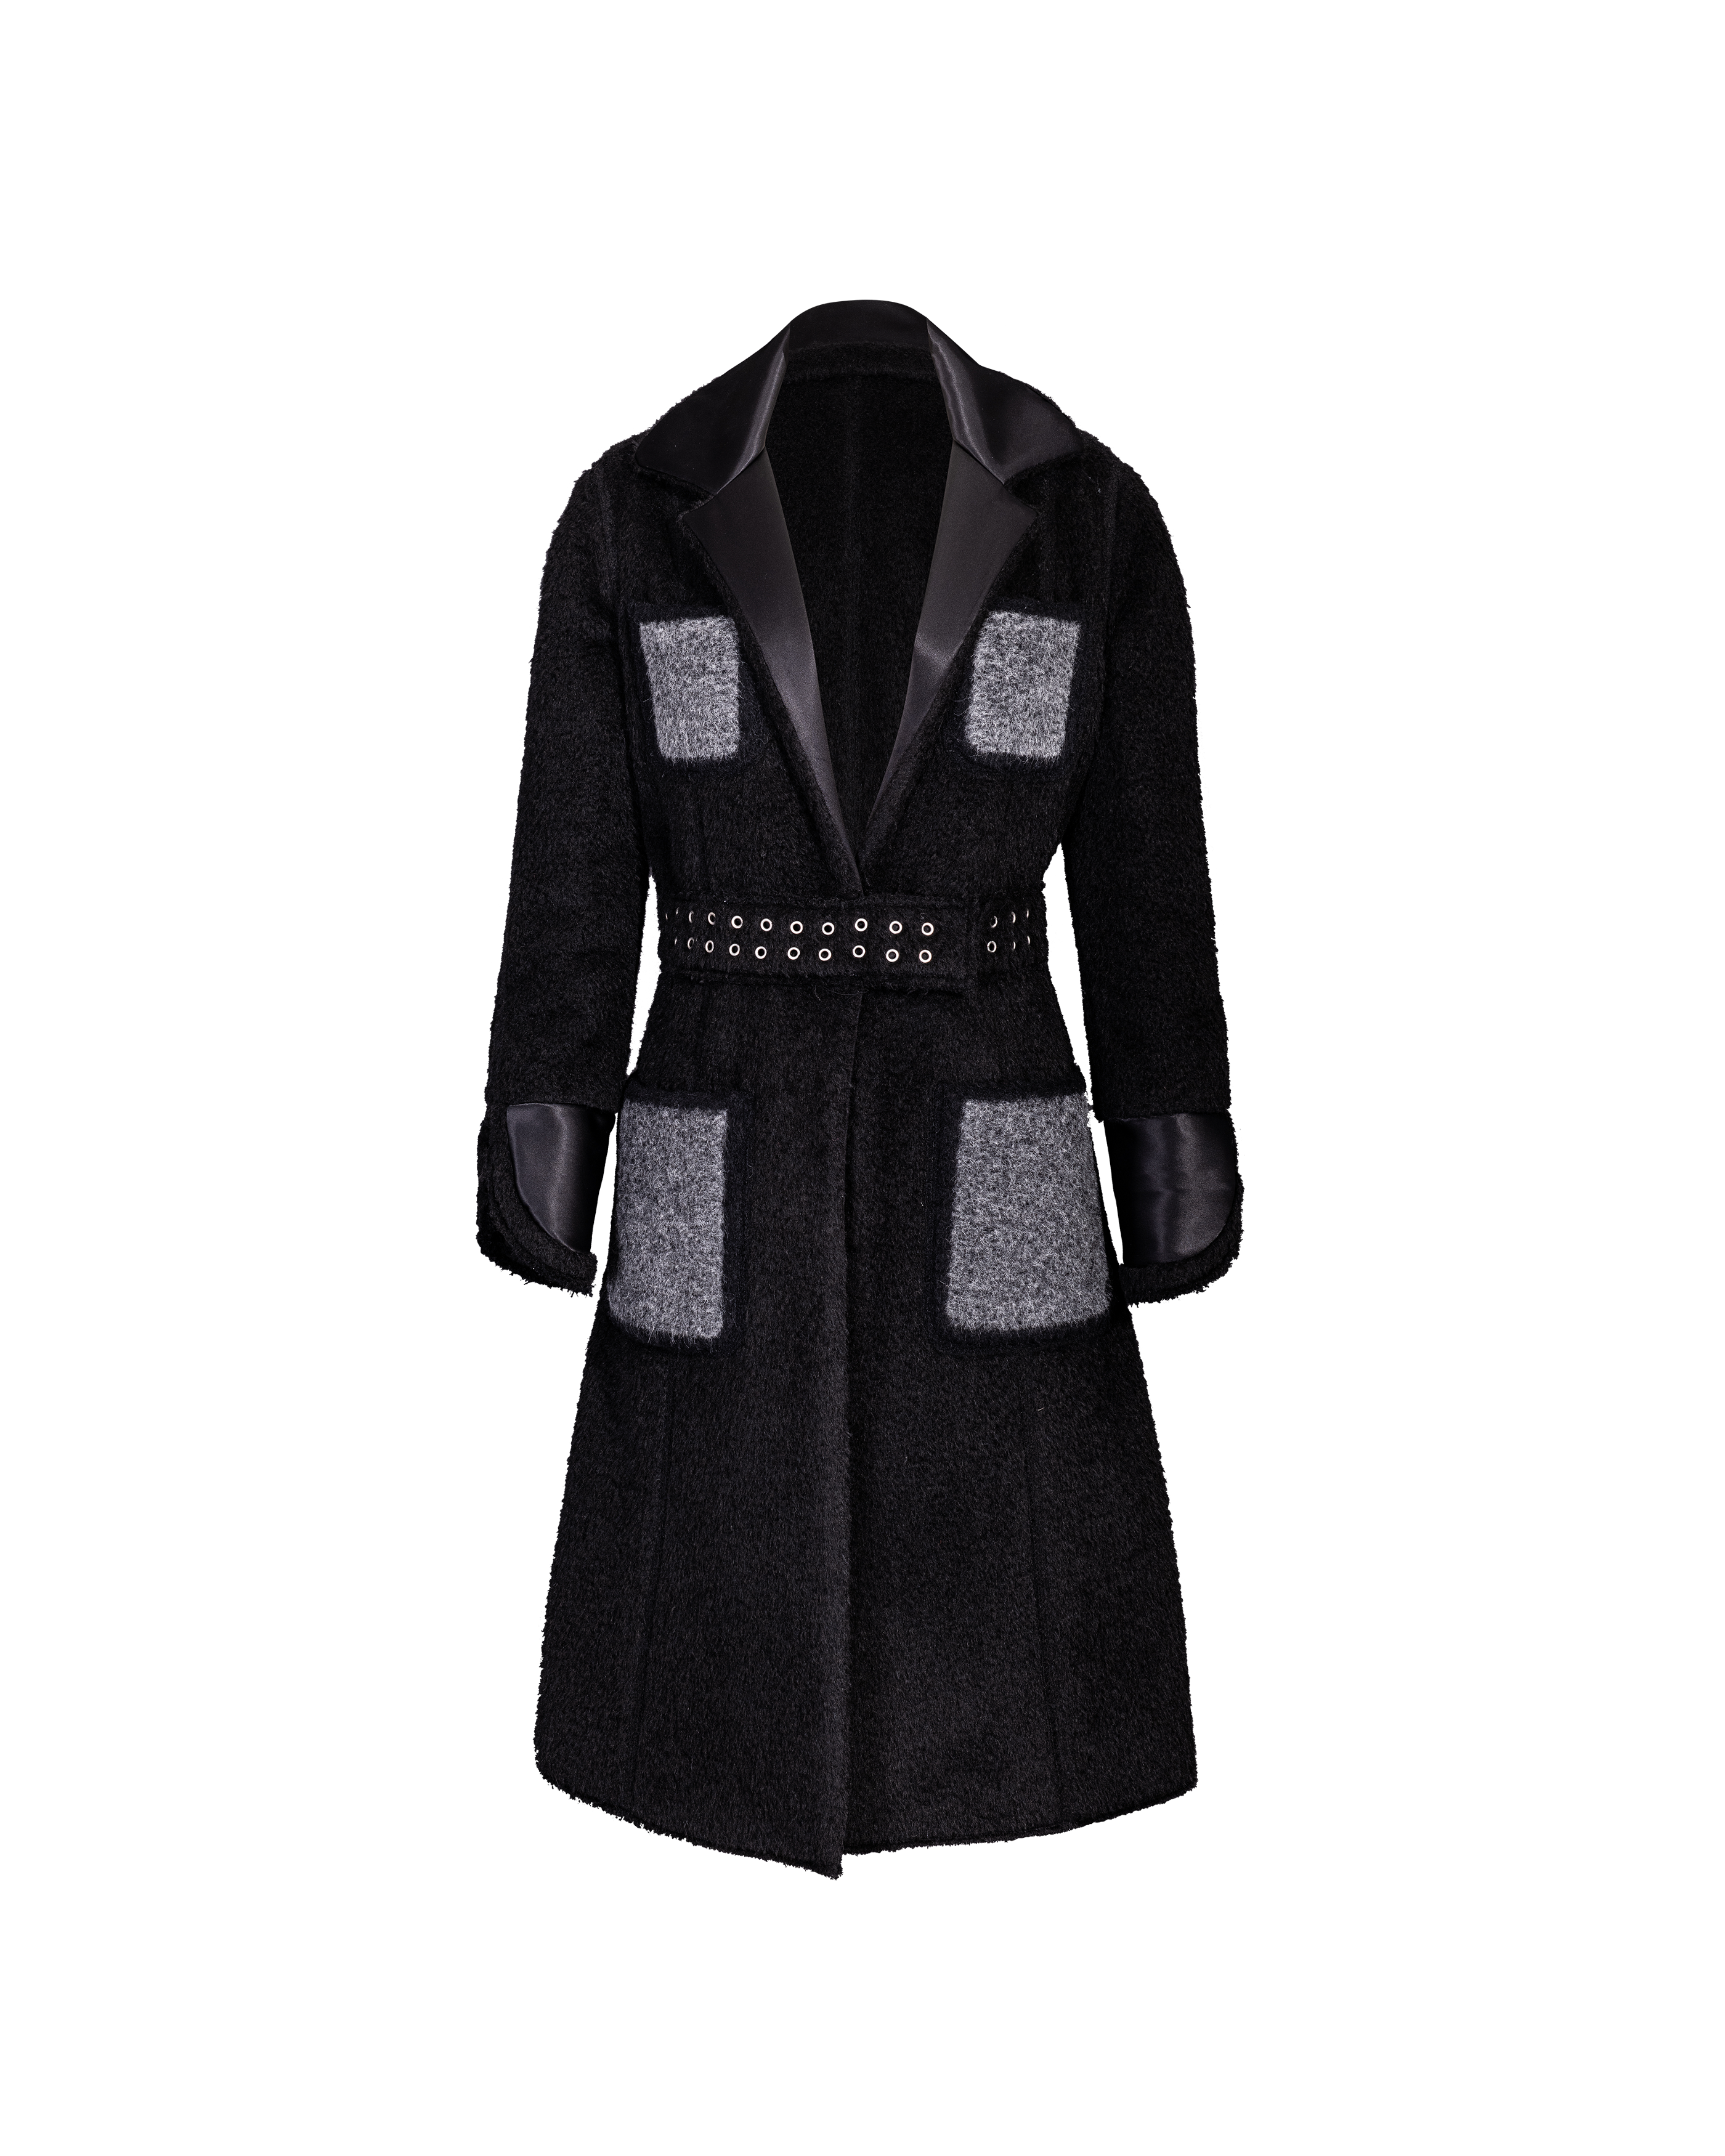 Pre-Fall 2014 Black Shearling Coat with Silk Lapels and Gray Contrast Pockets